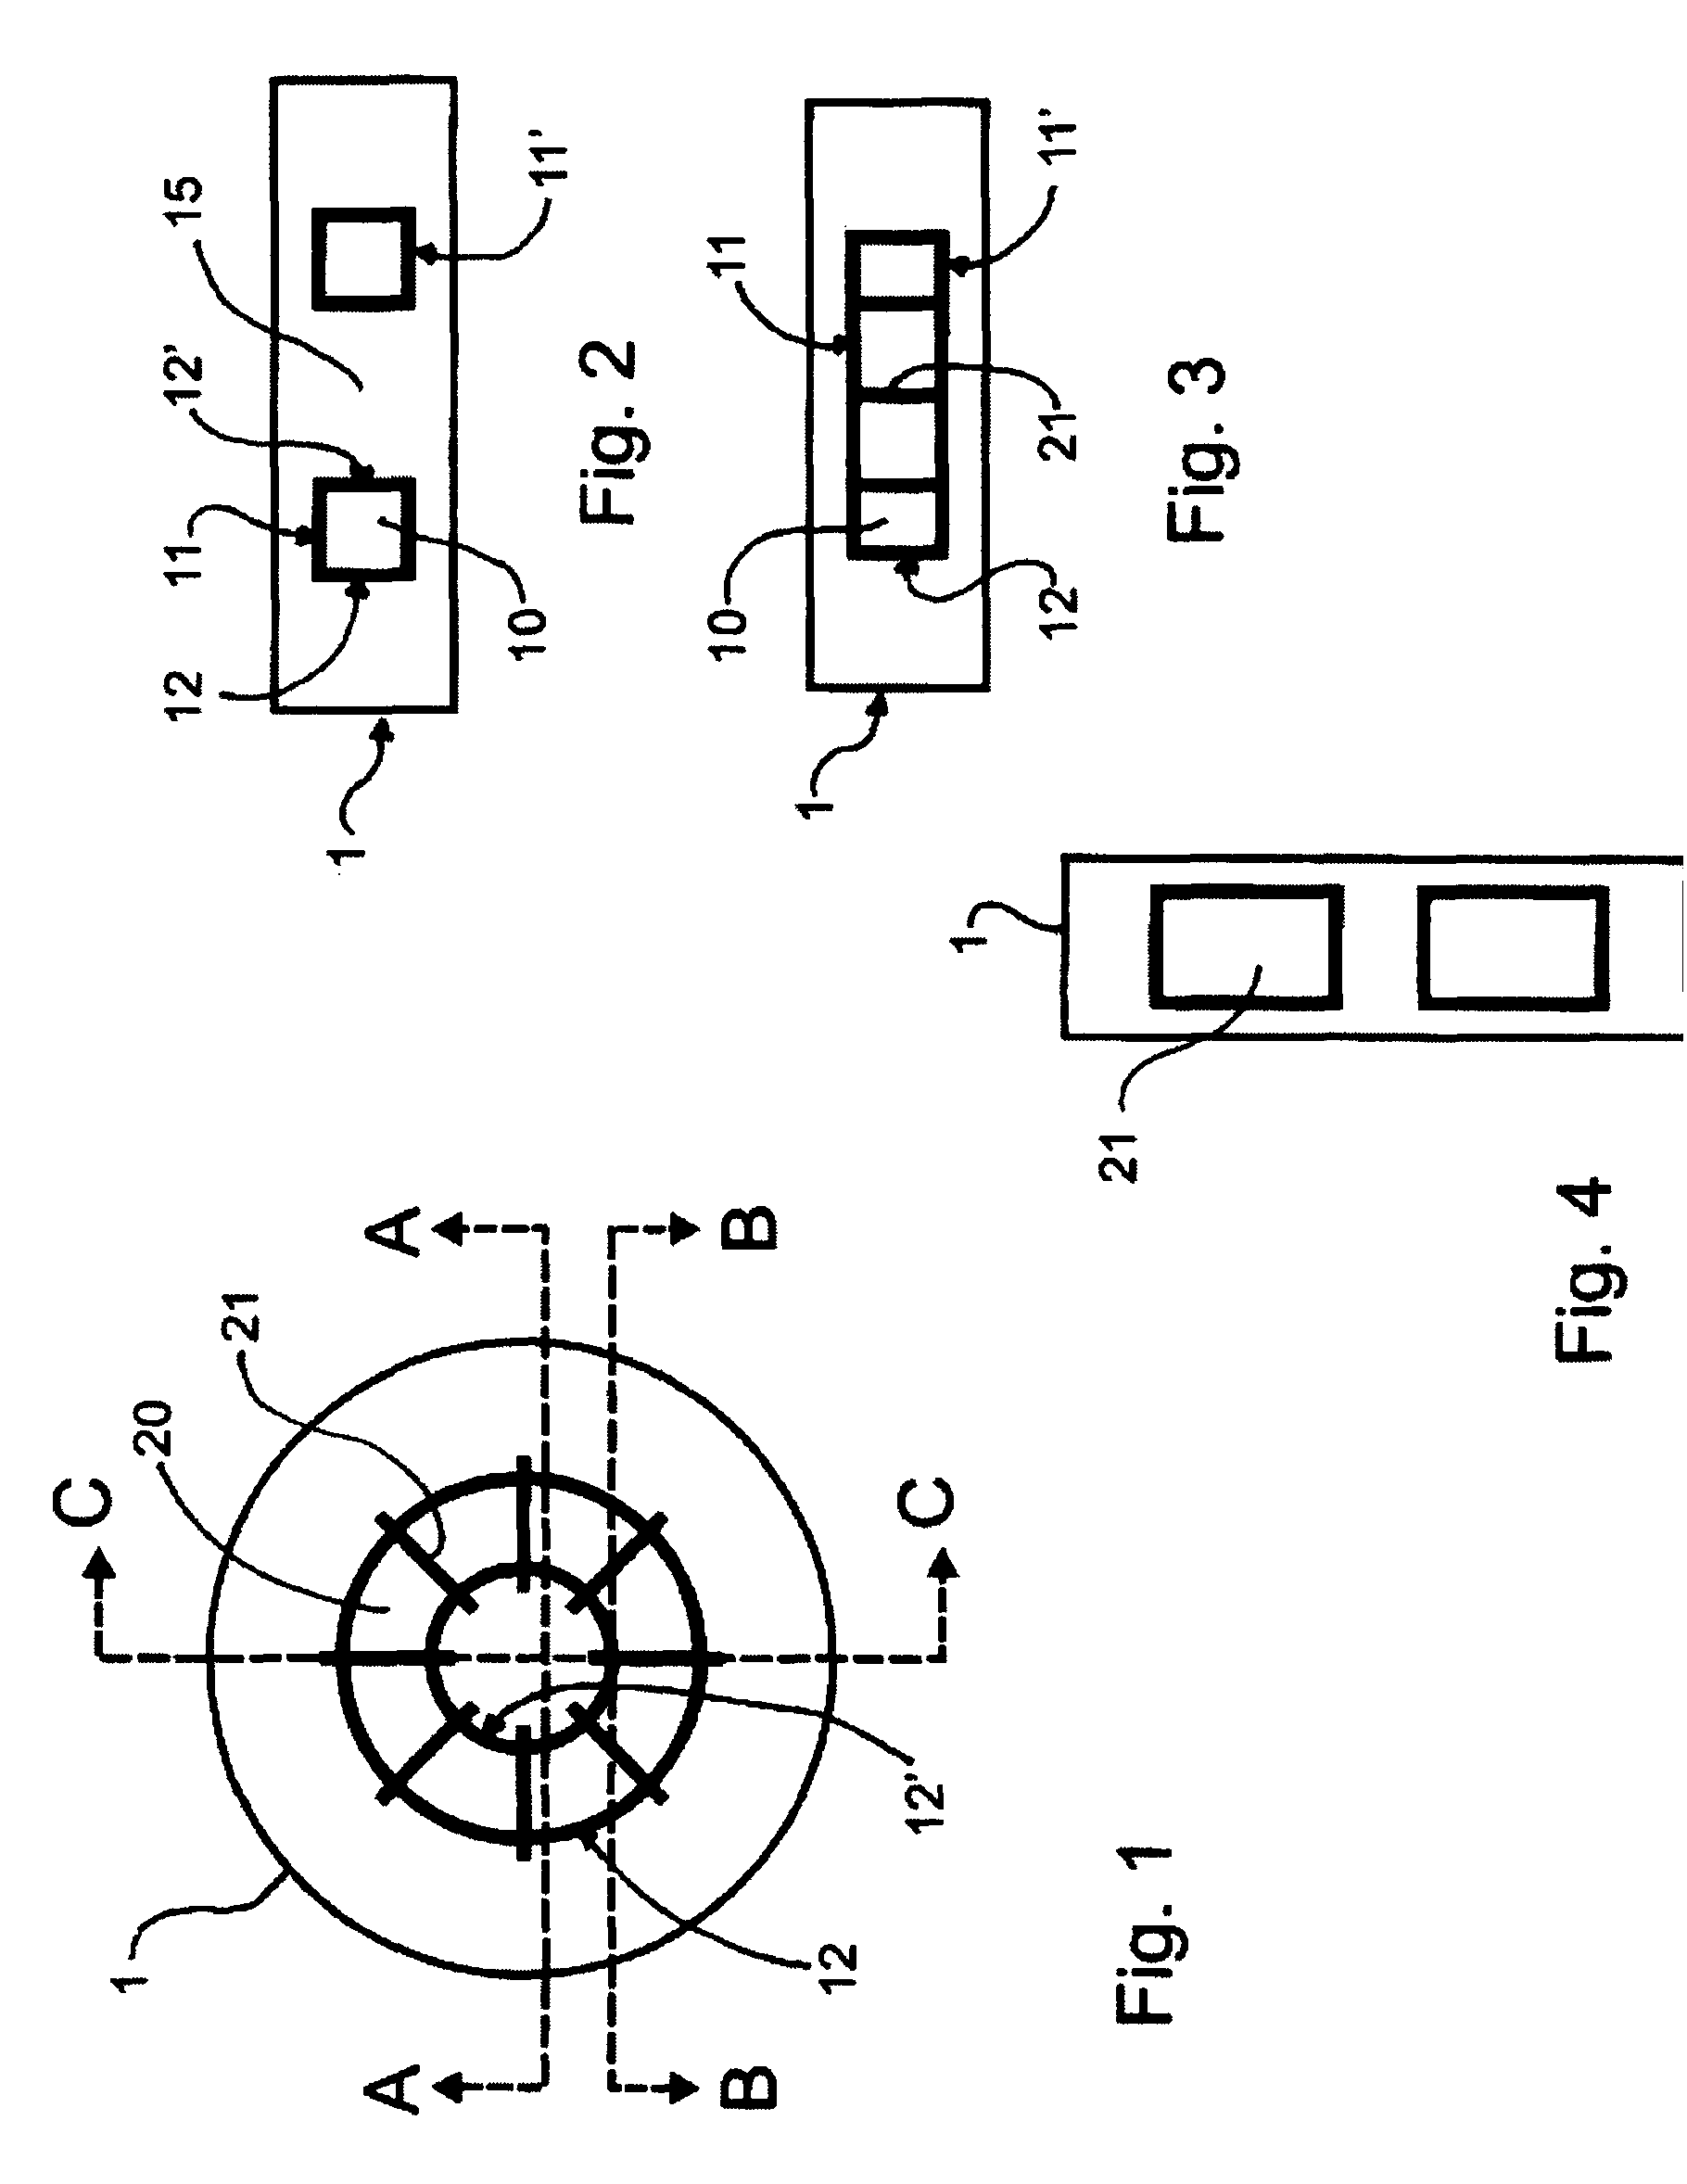 Control device for a surgical laser